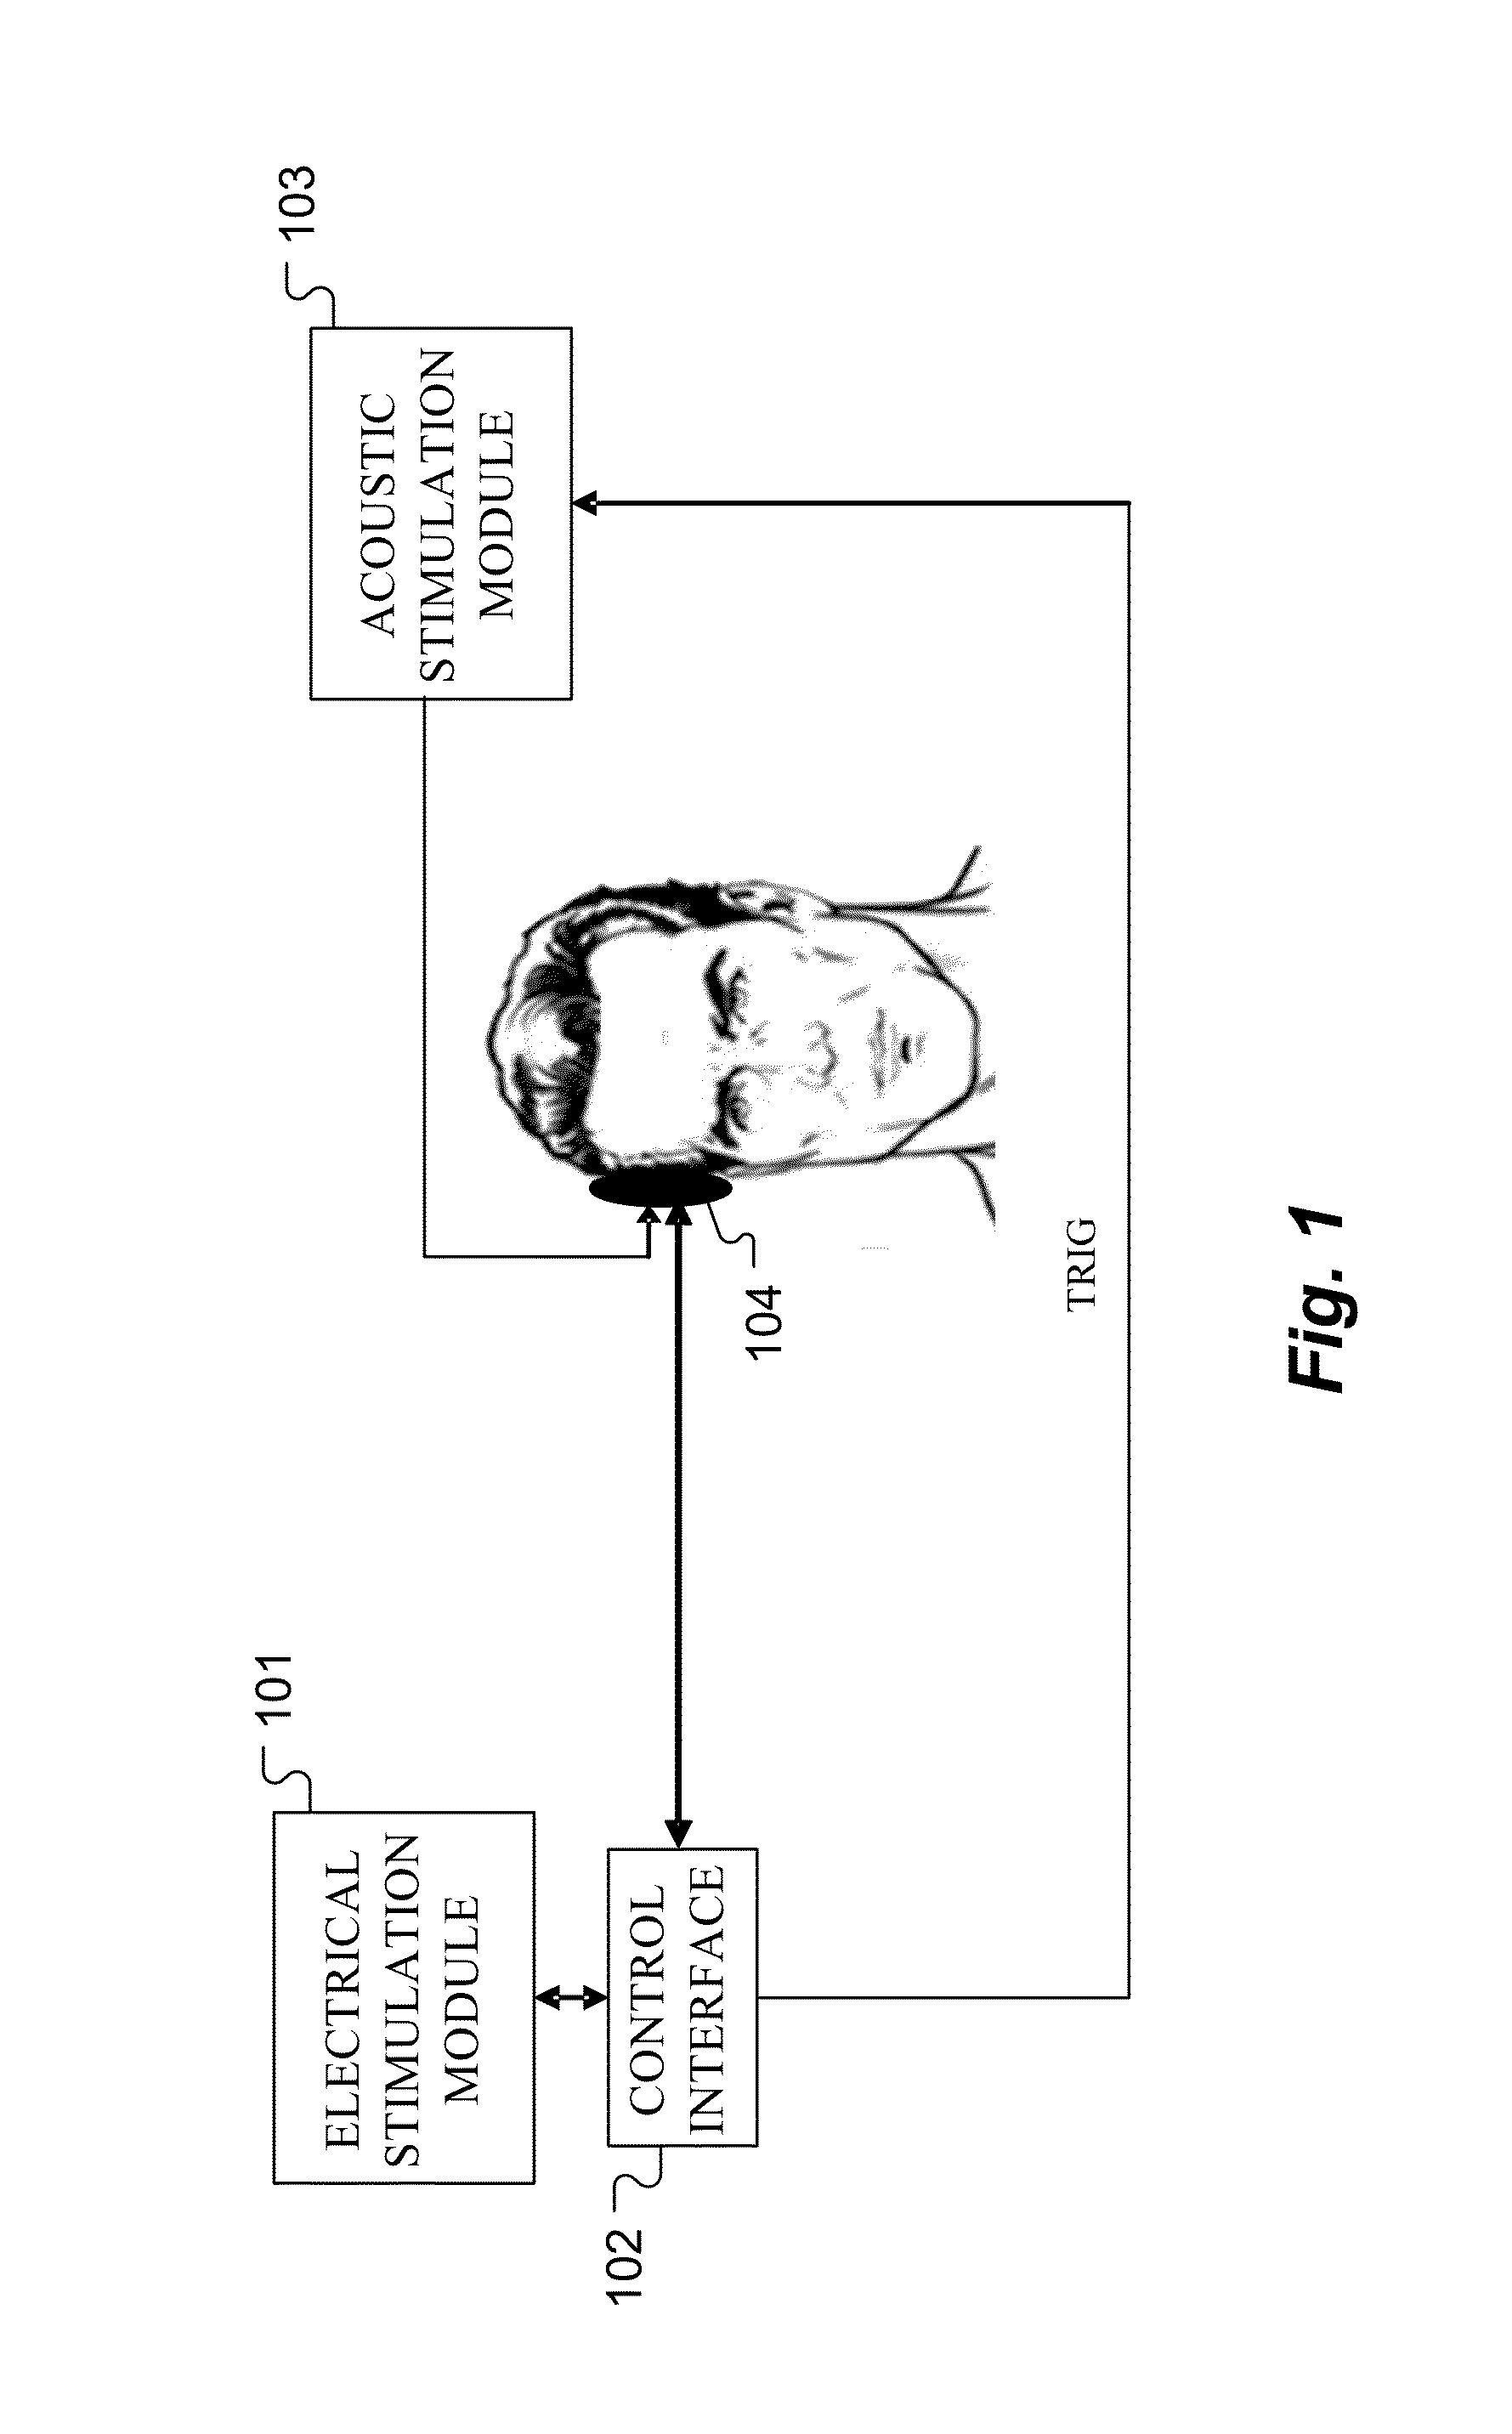 Artifact cancellation in hybrid audio prostheses